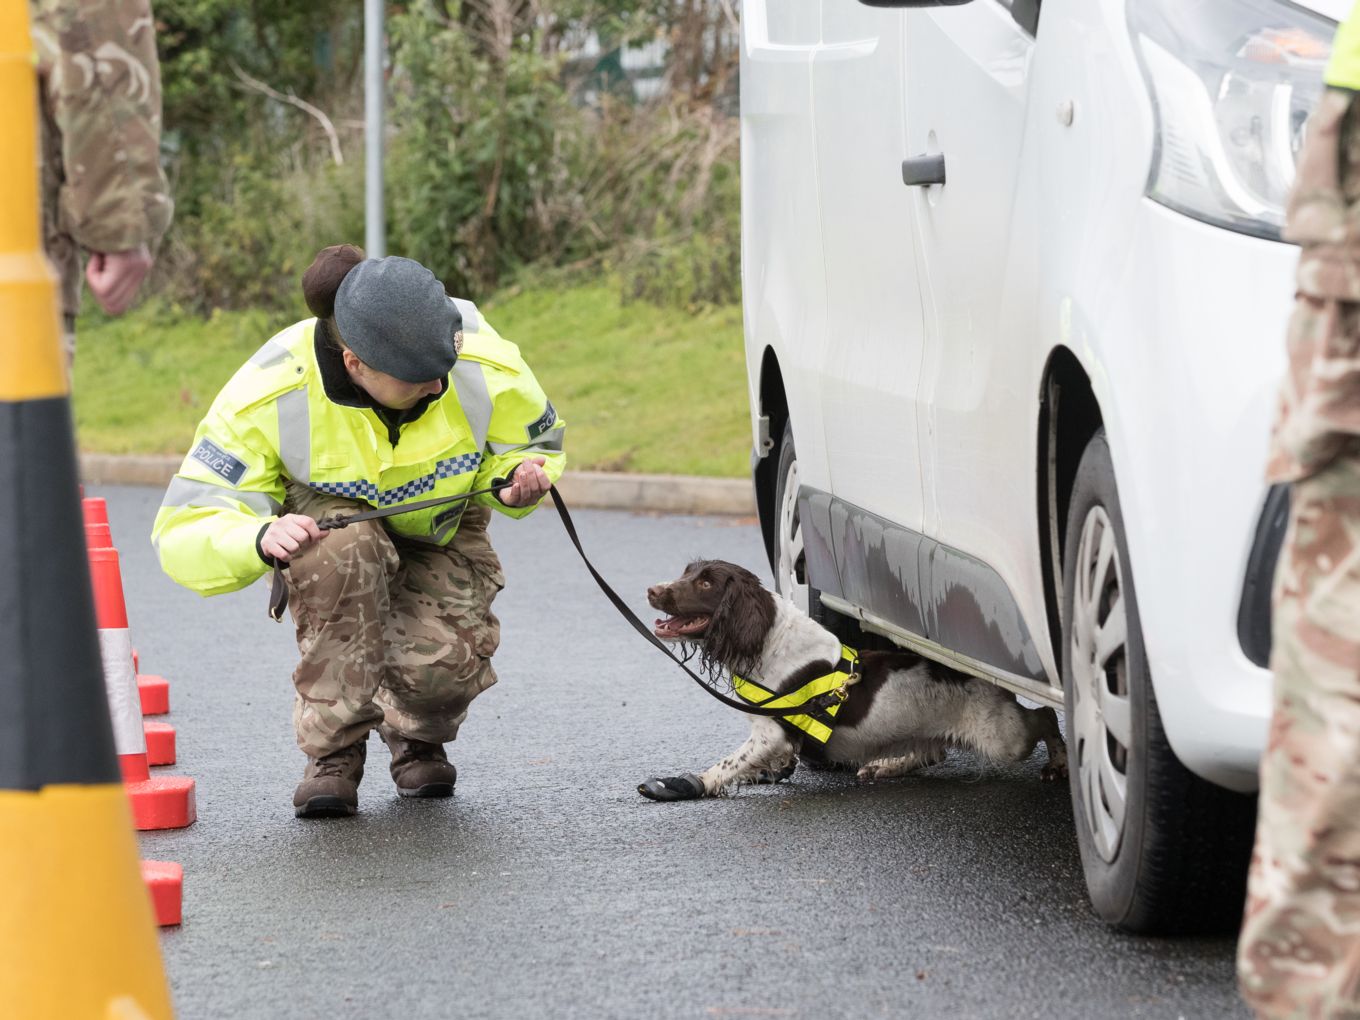 RAFP personnel with her explosives search dog coming out from under a vehicle.